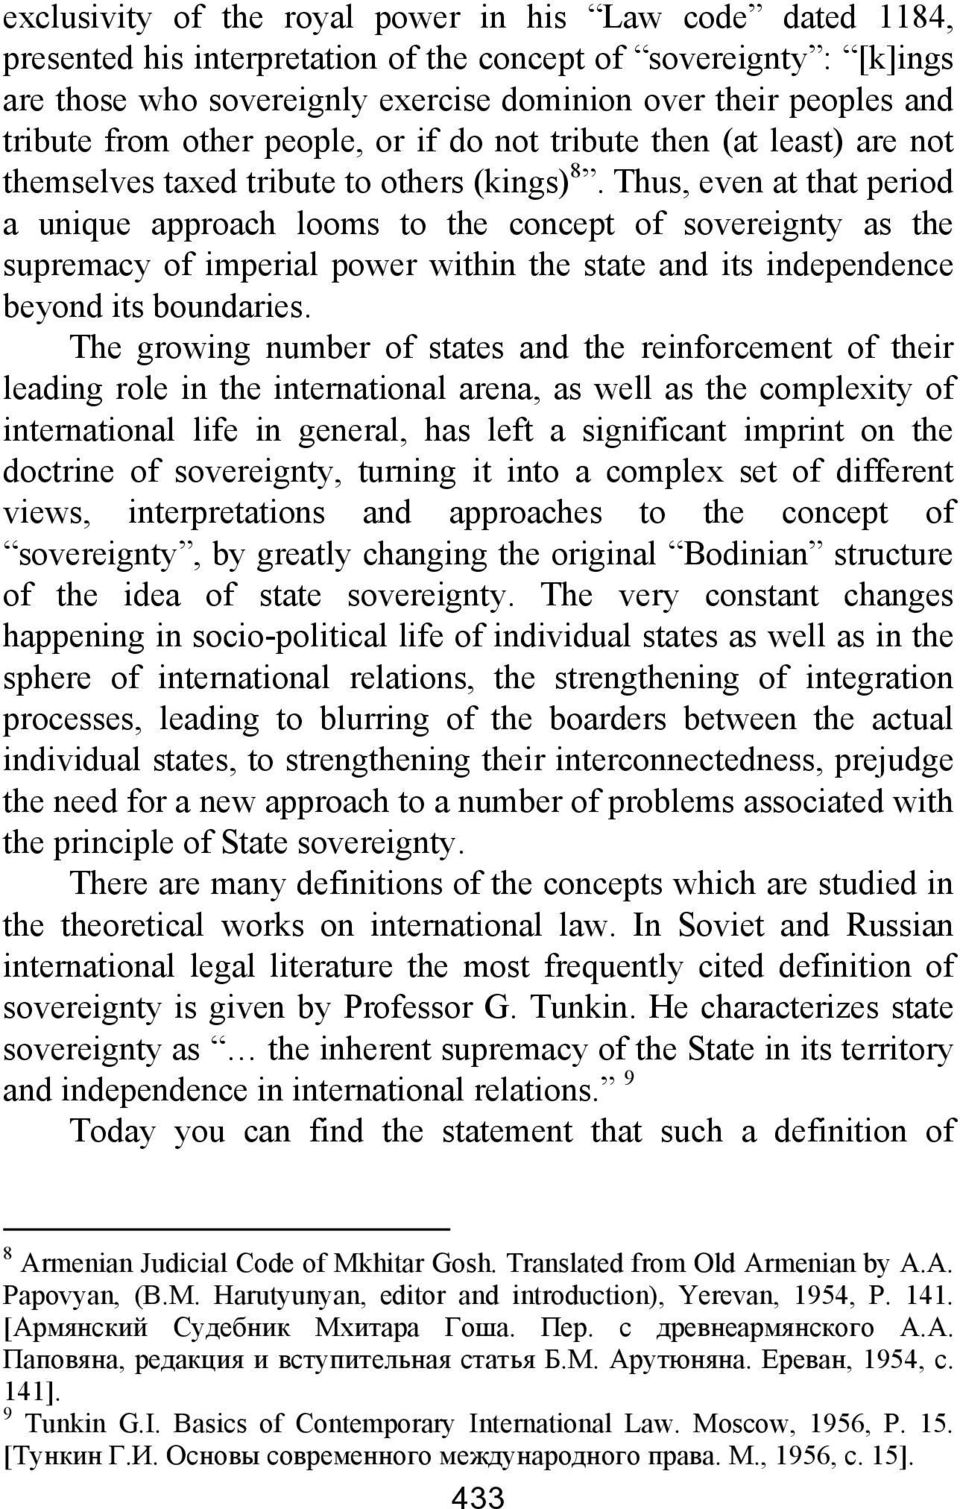 Thus, even at that period a unique approach looms to the concept of sovereignty as the supremacy of imperial power within the state and its independence beyond its boundaries.